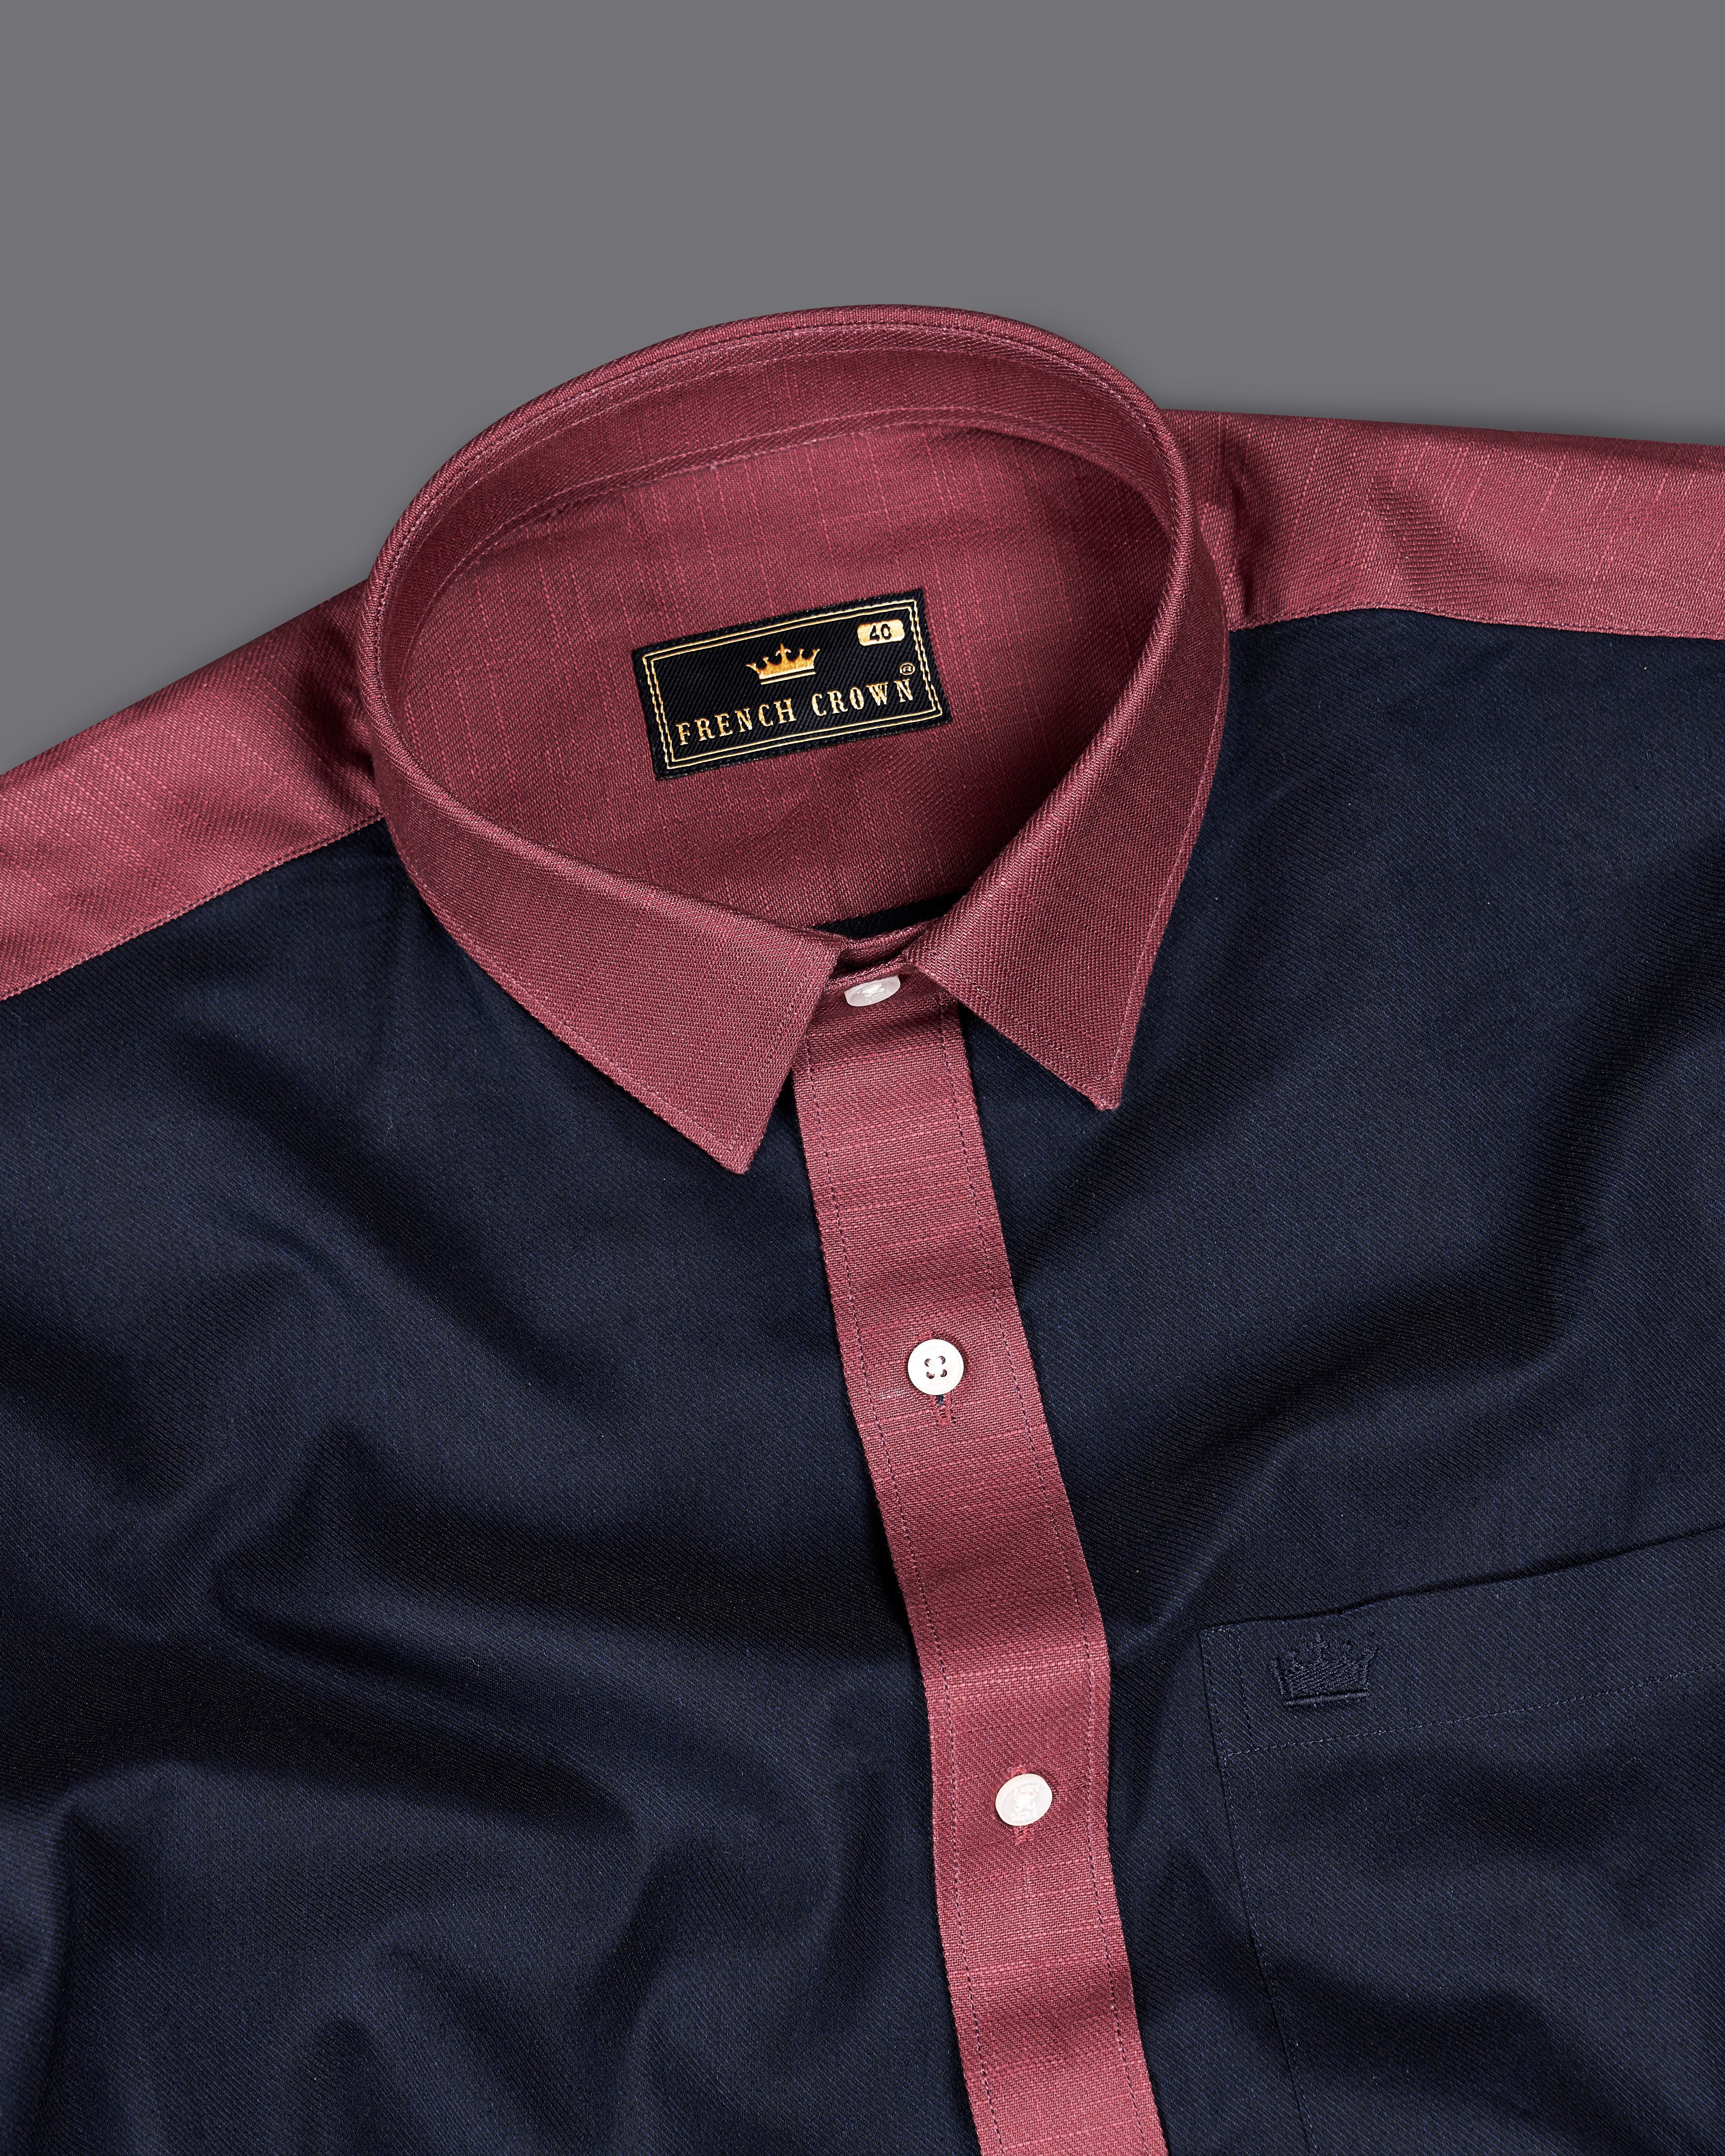 Firefly Navy Blue with Pink Patchwork Twill Premium Cotton Designer Shirt 9220-P207-38,9220-P207-H-38,9220-P207-39,9220-P207-H-39,9220-P207-40,9220-P207-H-40,9220-P207-42,9220-P207-H-42,9220-P207-44,9220-P207-H-44,9220-P207-46,9220-P207-H-46,9220-P207-48,9220-P207-H-48,9220-P207-50,9220-P207-H-50,9220-P207-52,9220-P207-H-52